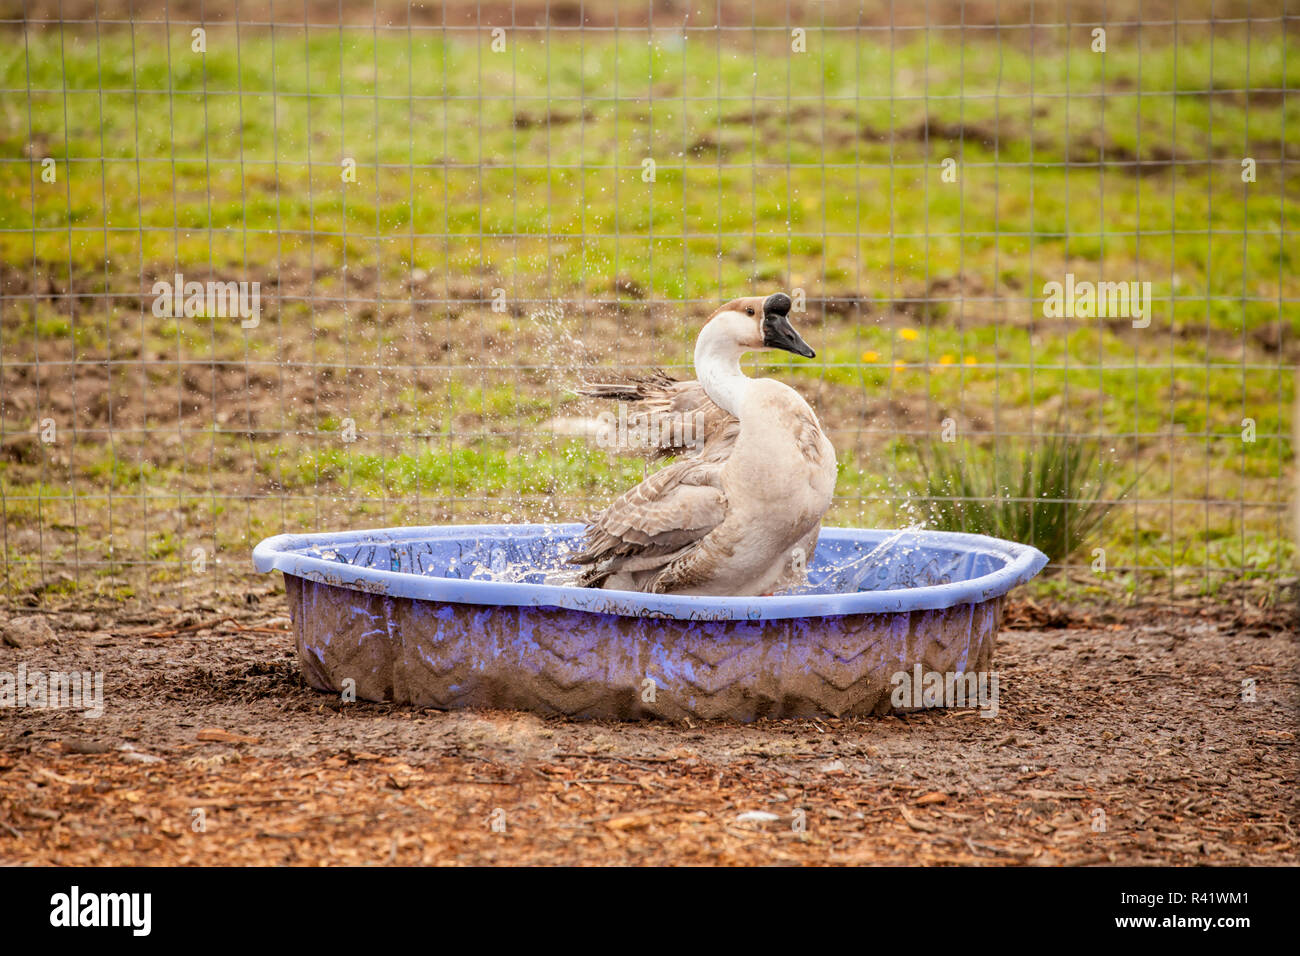 Carnation, Washington State, USA. Domestic Swan Goose bathing in a wading pool at a farm. (PR) Stock Photo